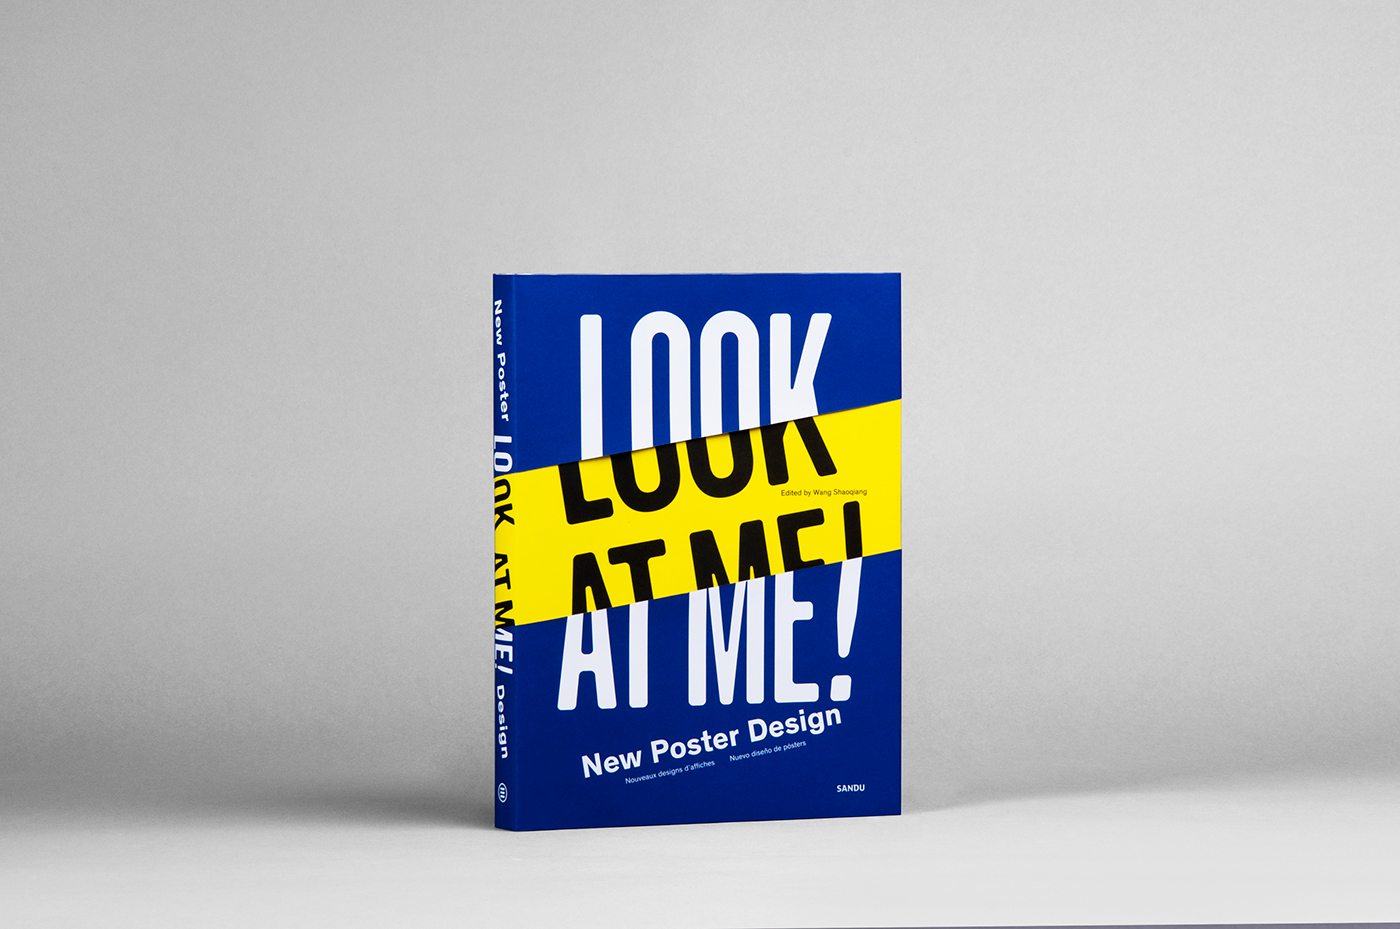 Look at me! － New Poster Design on Behance